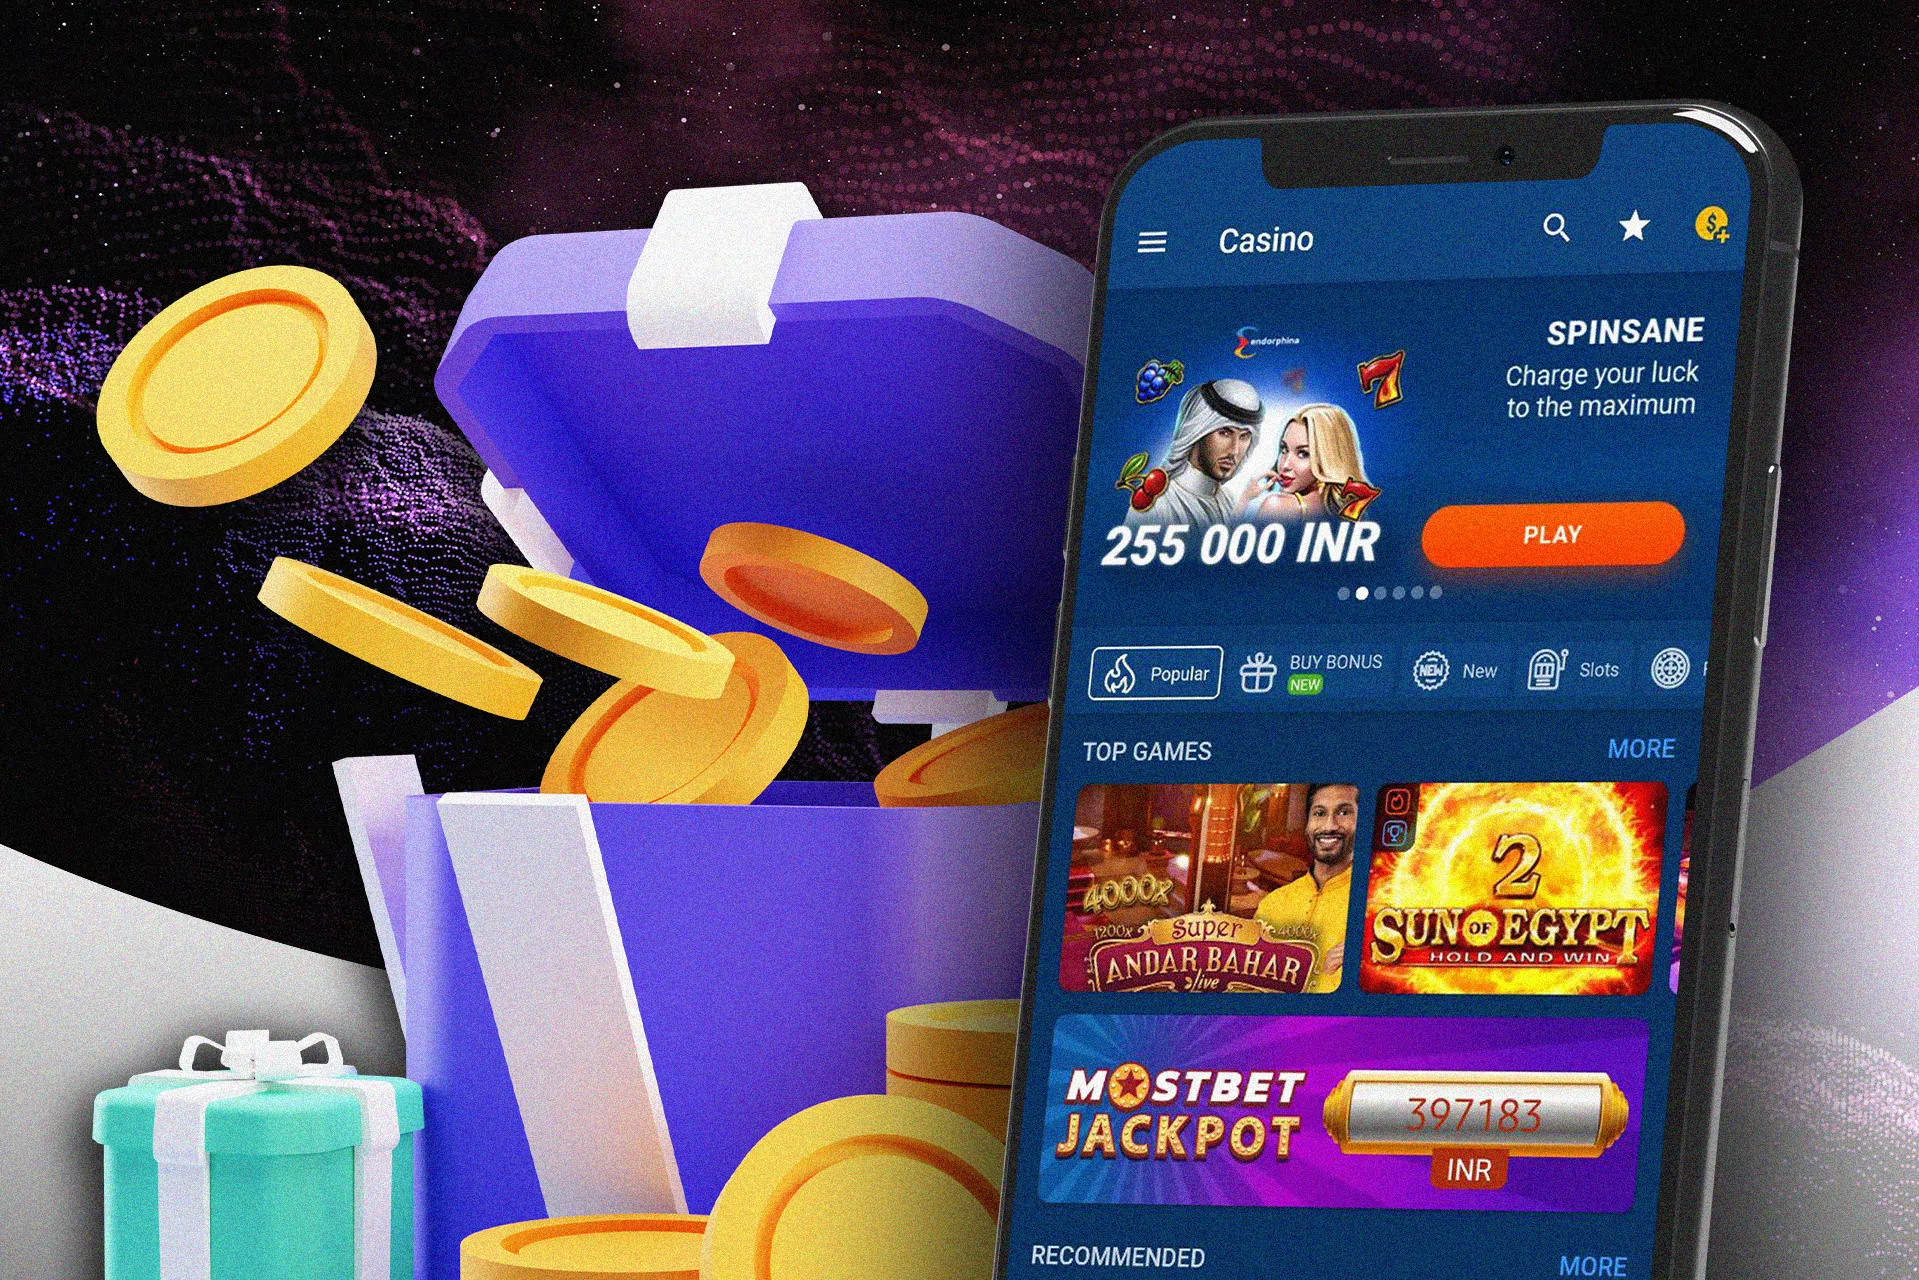 Get free spins on the online casino games.